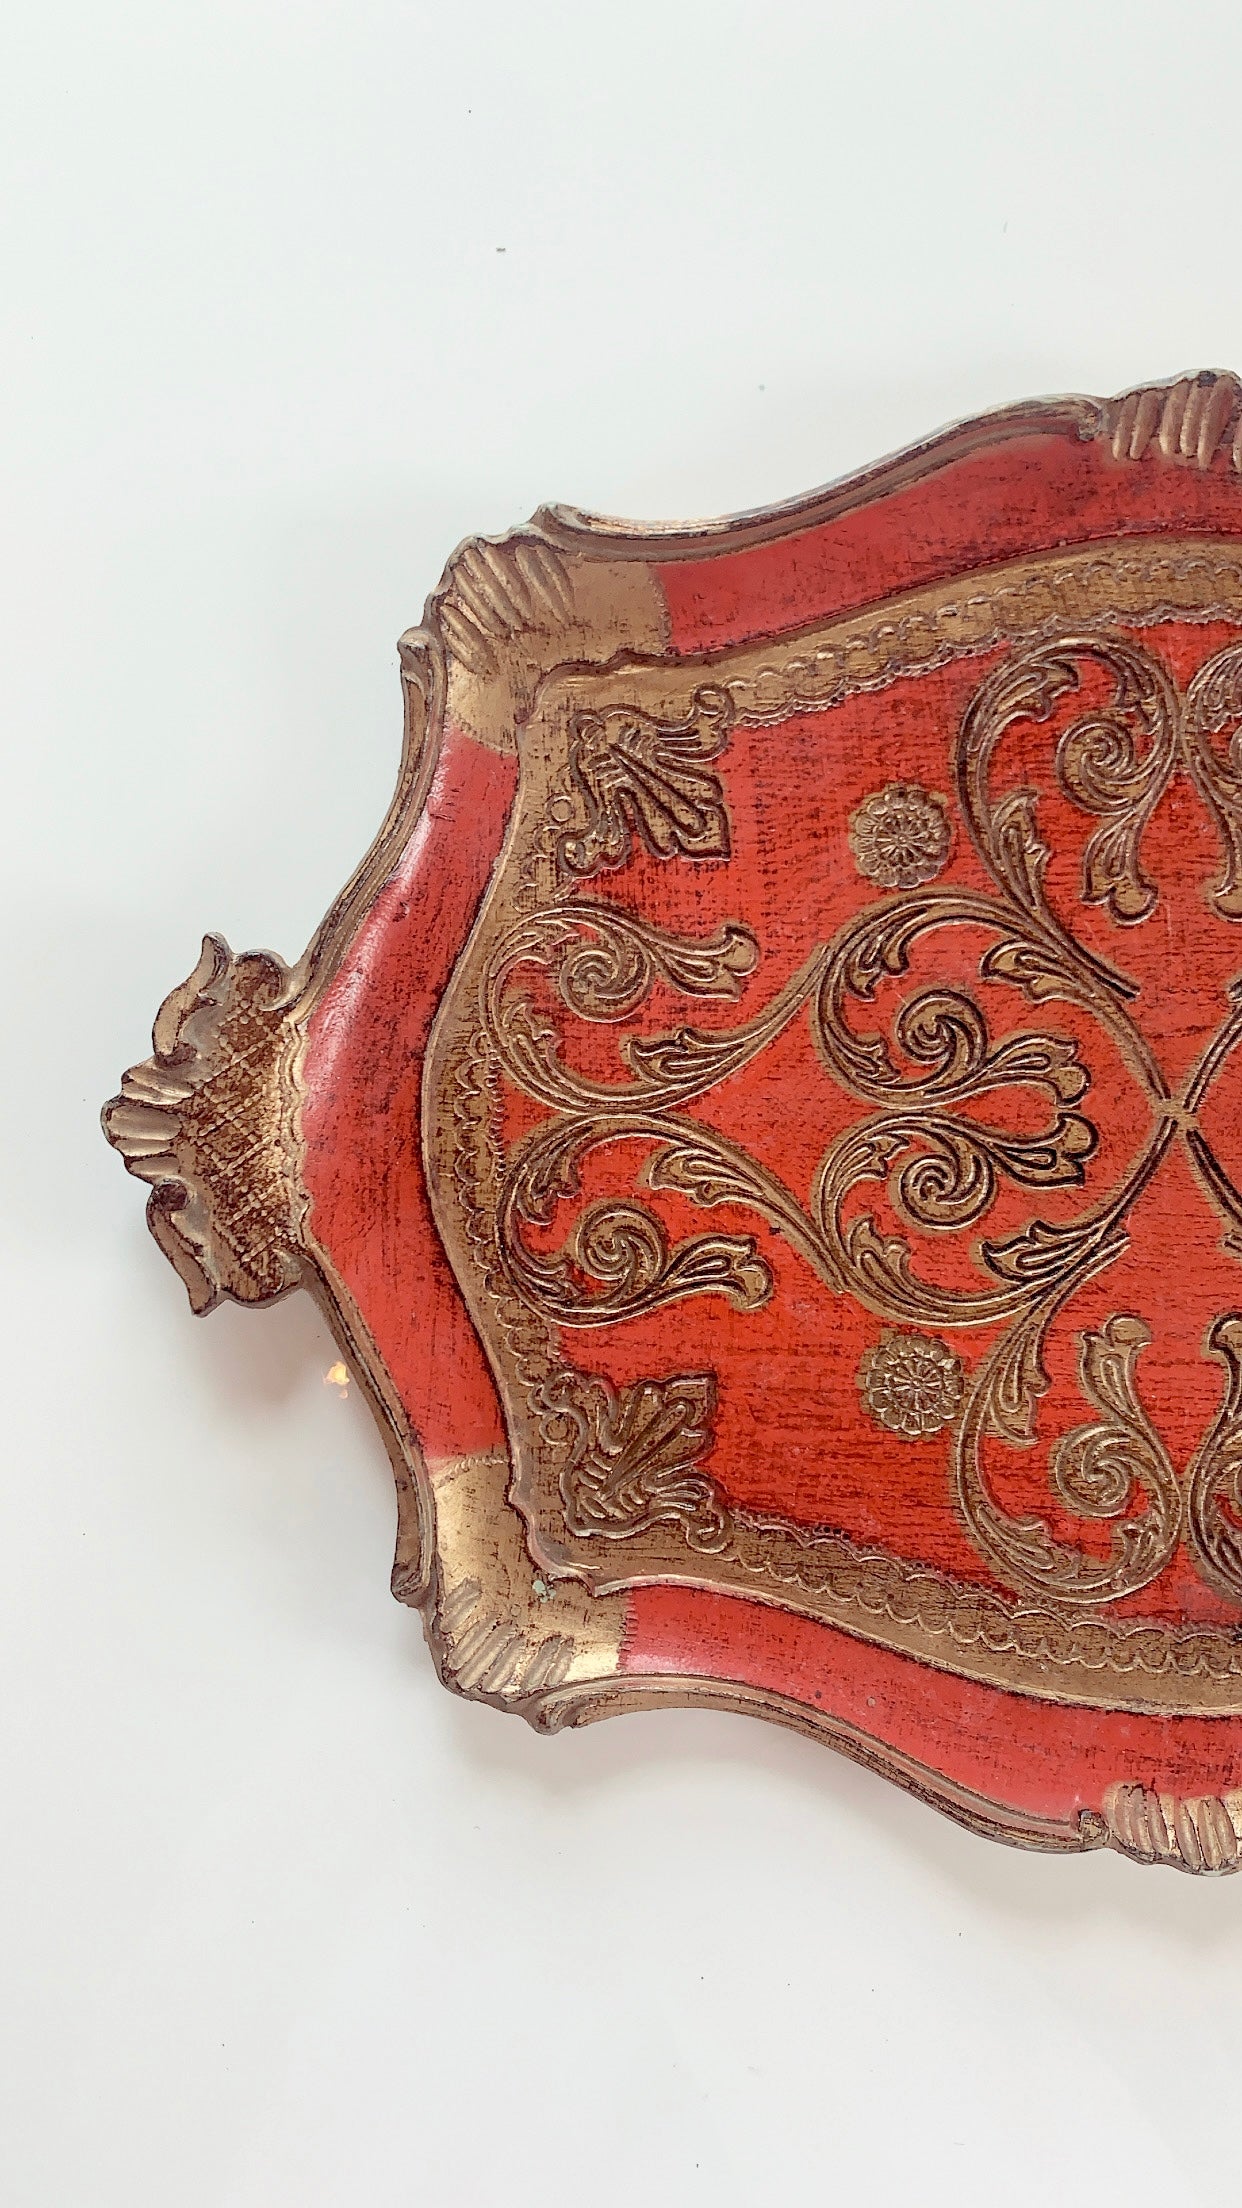 Vintage Florentine Tray in Red/Orange and Gold